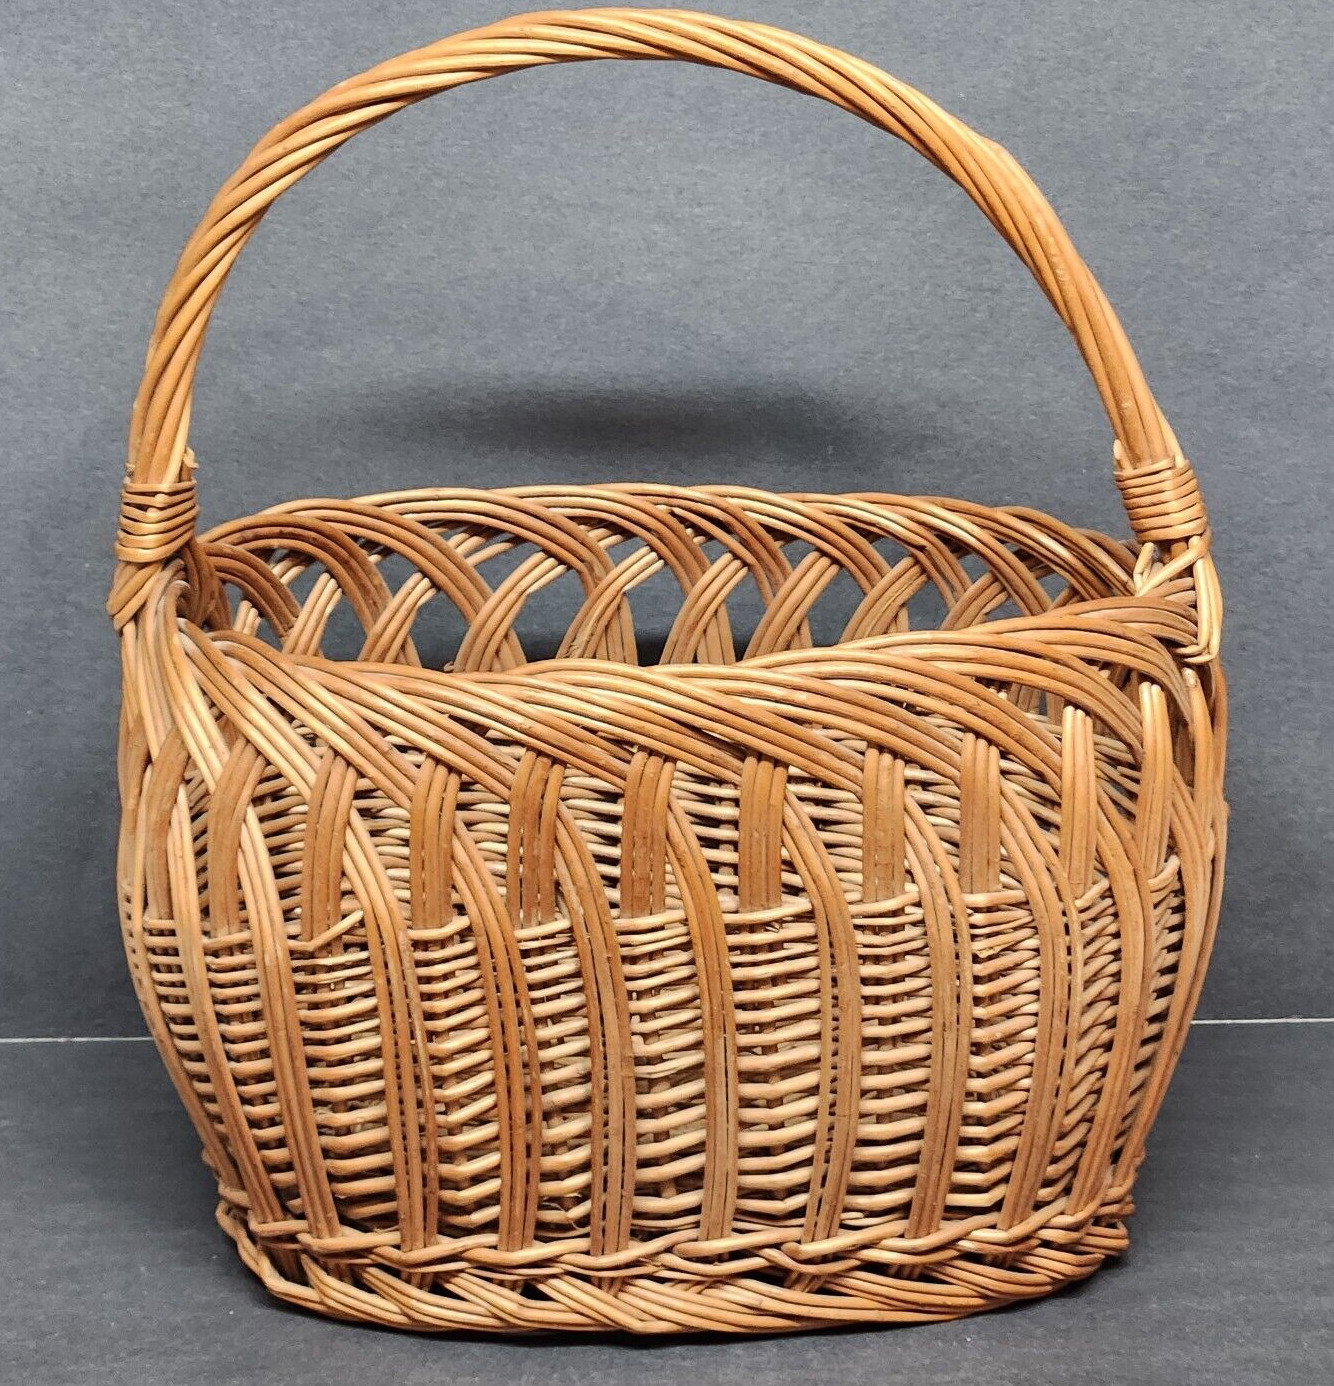 Unbranded Brown Woven Straw Wicker Market Basket French Style Vintage w Handle